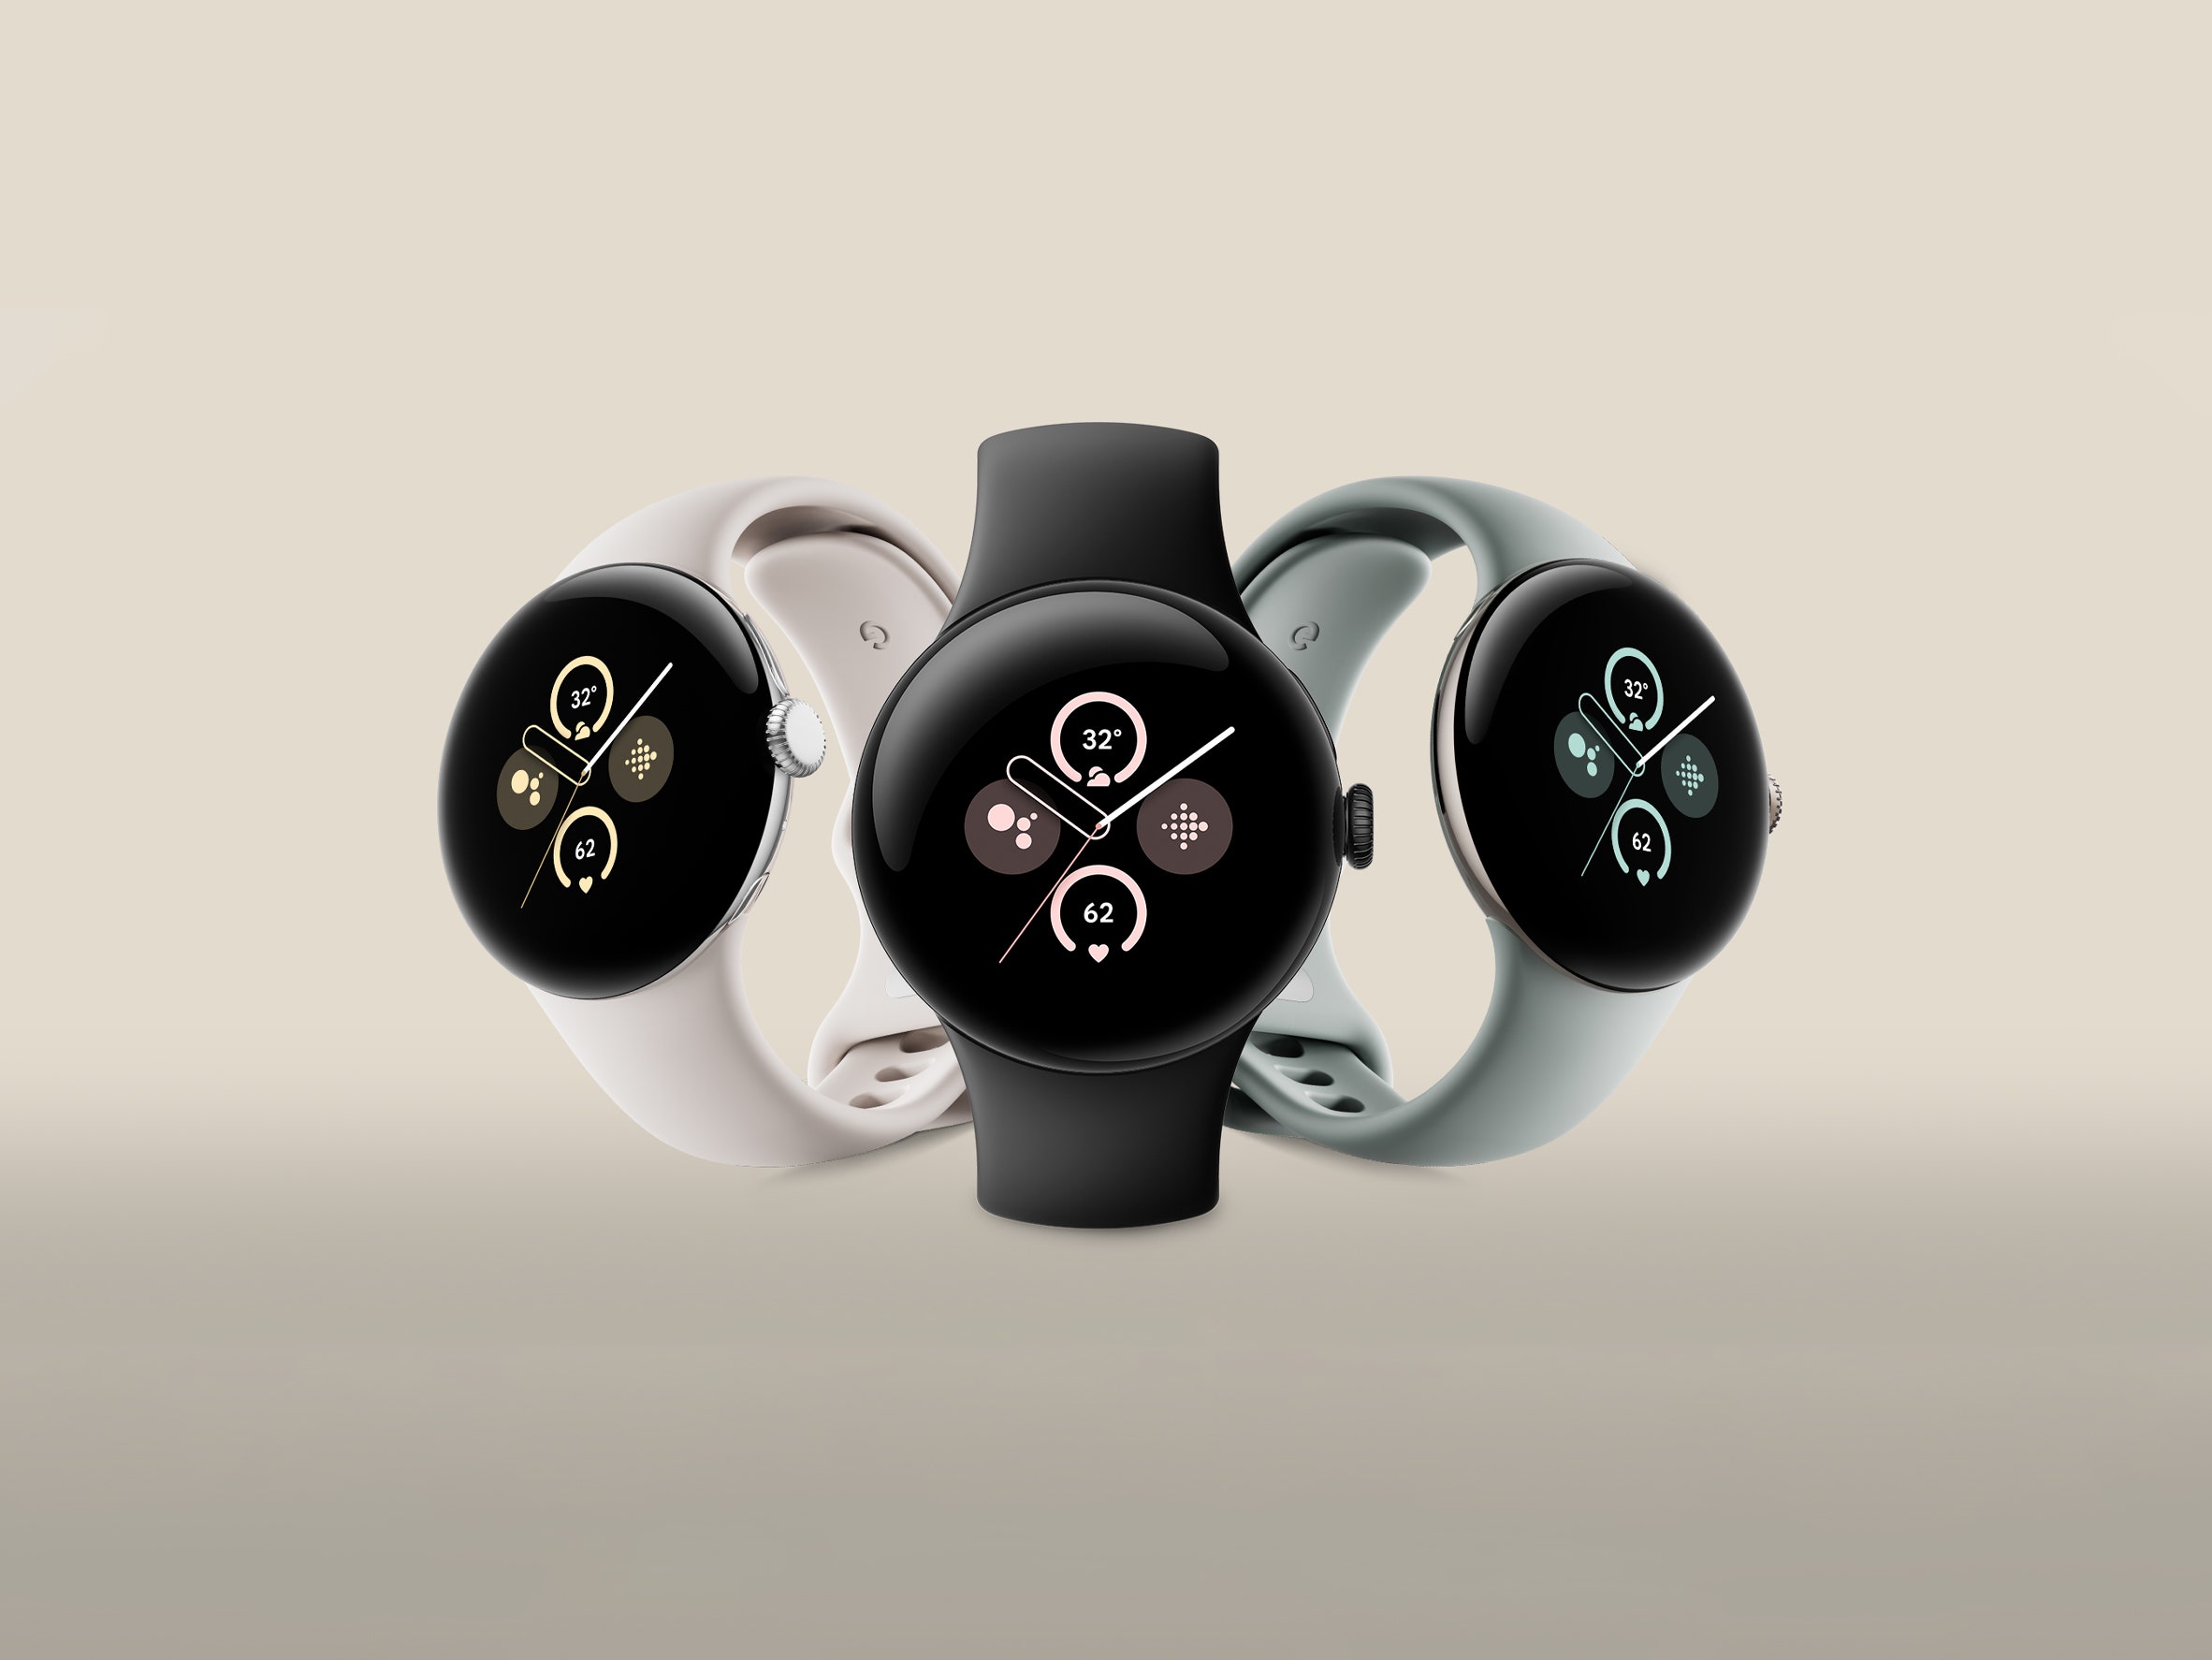 The original Pixel Watch with the software update got new features like the Pixel Watch 2